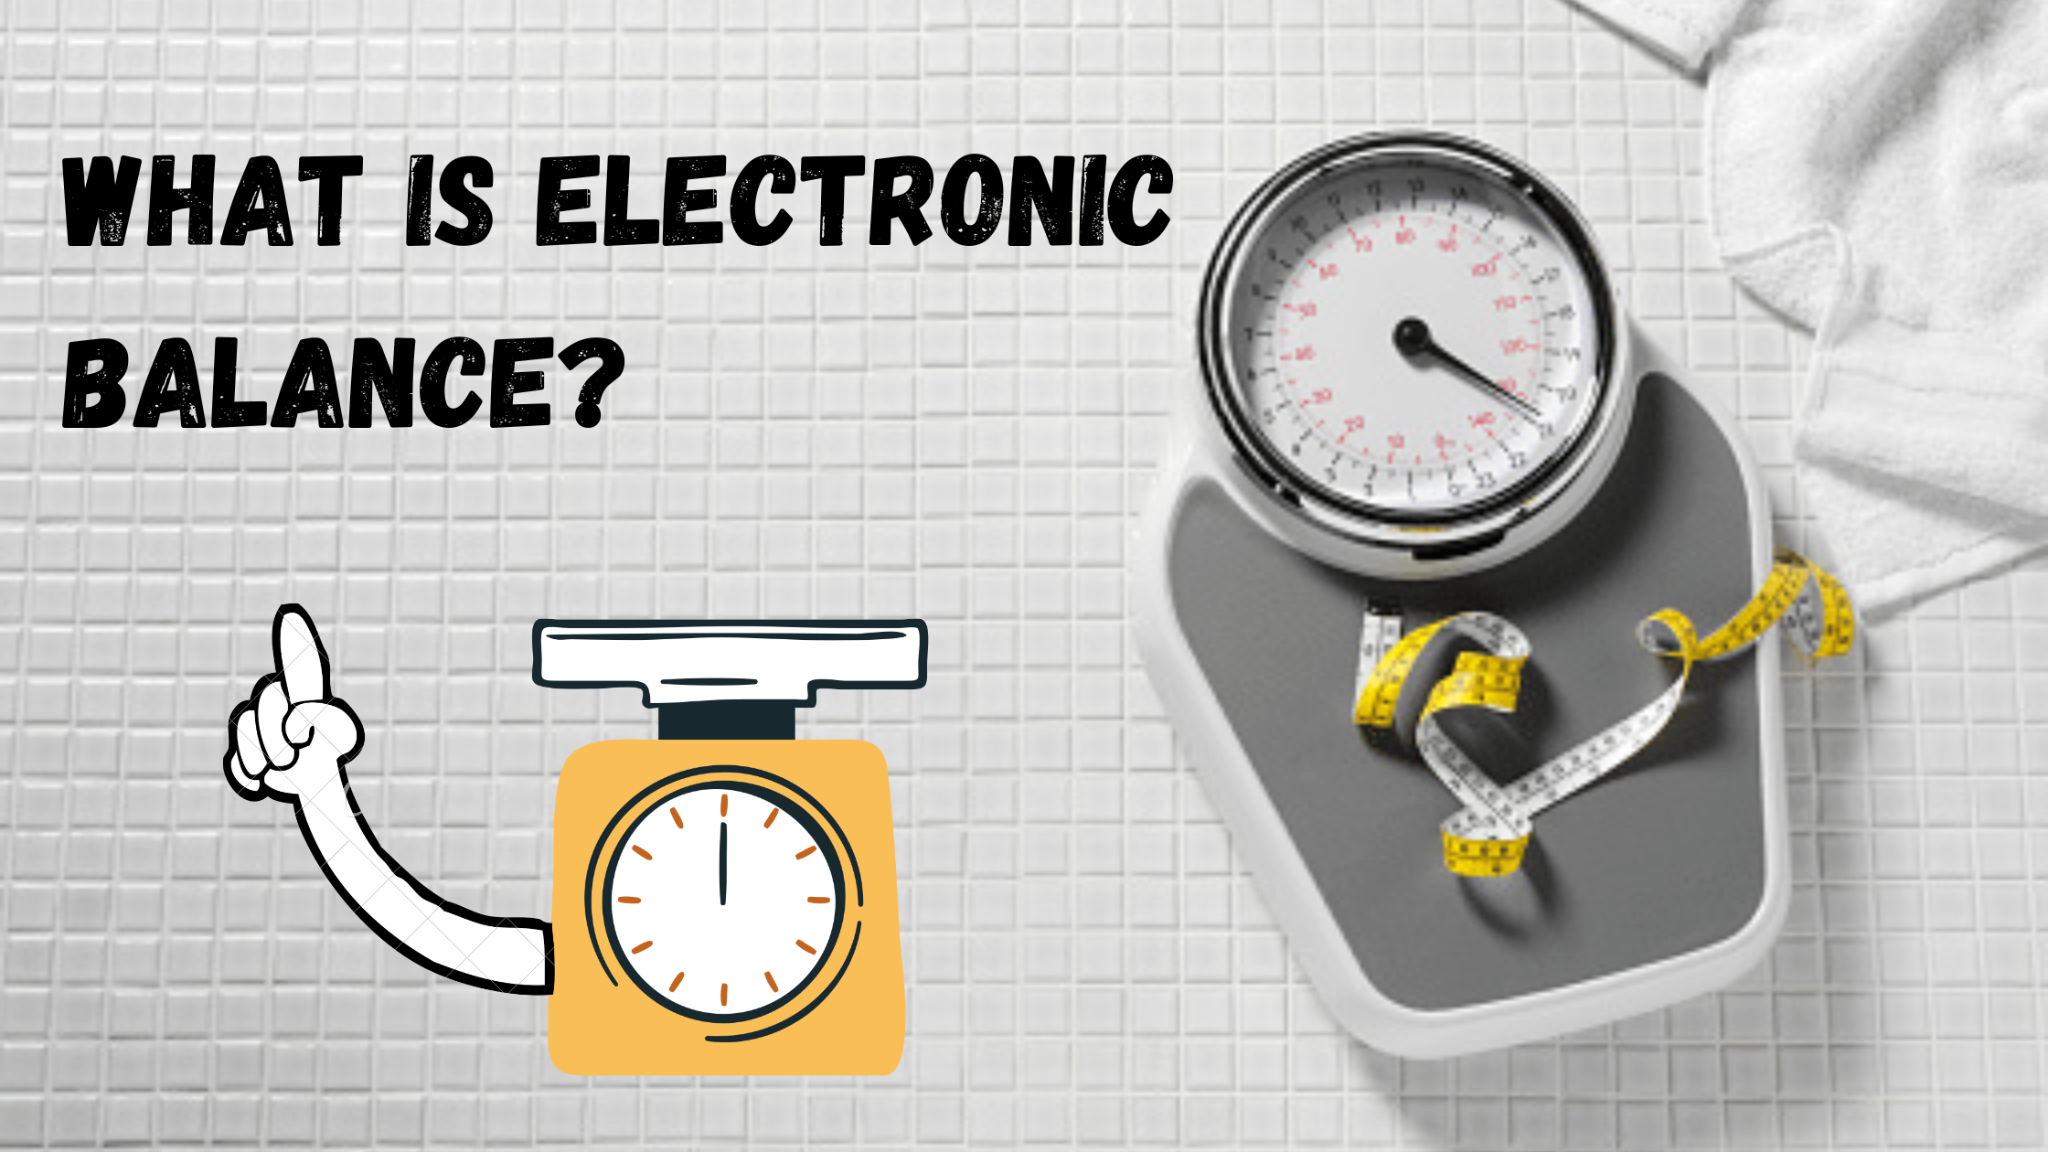 What is Electronic Balance? What are the steps to use it